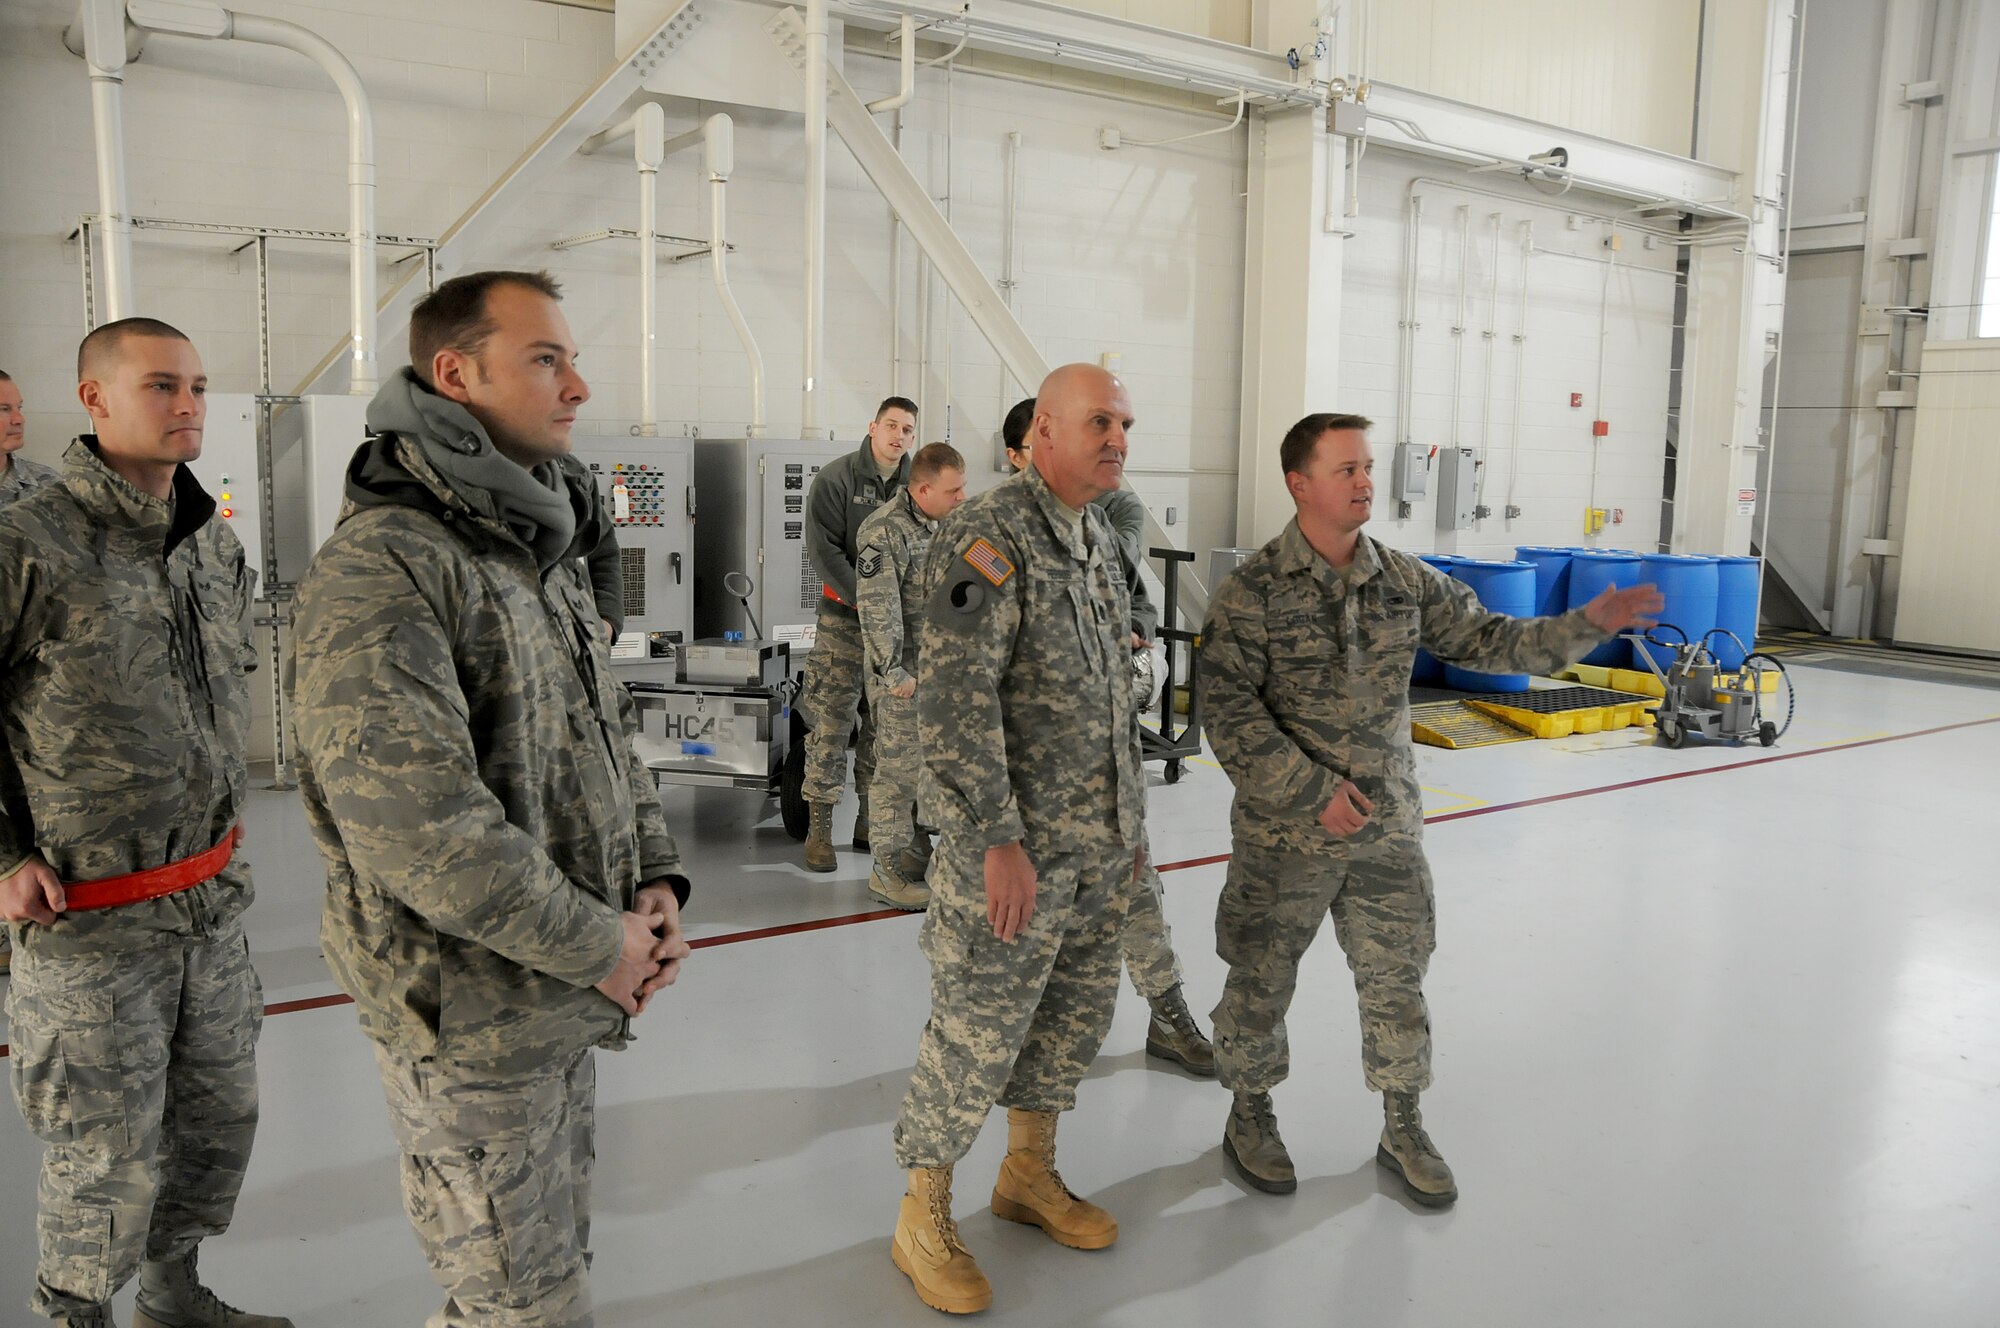 Command Sgt. Maj. Alan M. Ferris, Virginia National Guard Senior Enlisted Advisor to the Adjutant General of Virginia, met with Airmen from the 192nd Fighter Wing, Langley Air Force Base, Hampton, Va. During his visit, Ferris received a tour and mission brief on the F-22 Raptor and Intelligence Squadron capabilities.  
The SEA’s responsibilities include advising the Adjutant General of Virginia on all enlisted matters affecting training and utilization, health of the force, and enlisted professional development of Virginia National Guard Airmen and Soldiers.
